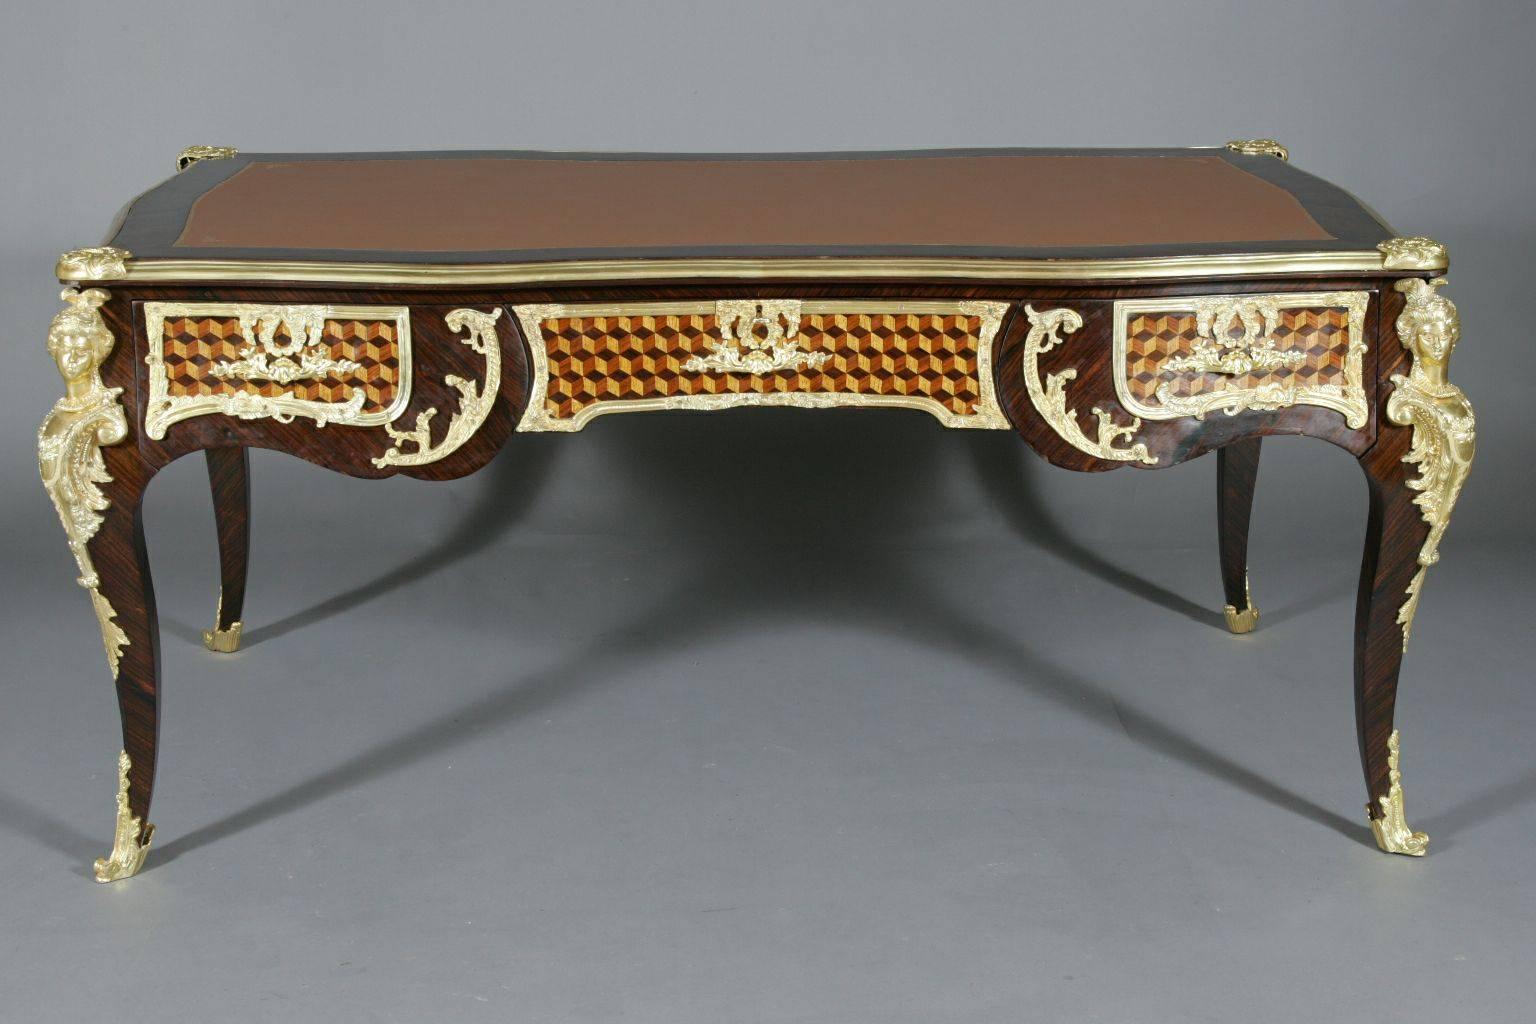 Monumental French bureau plat in Louis XV style.
Tulip veneer on solid pinewood. Cube marquetry inlaid with finely engraved brass fixtures. On a slope, two forward glancing, impressive female busts on curved legs. Highly decorative Brass fittings